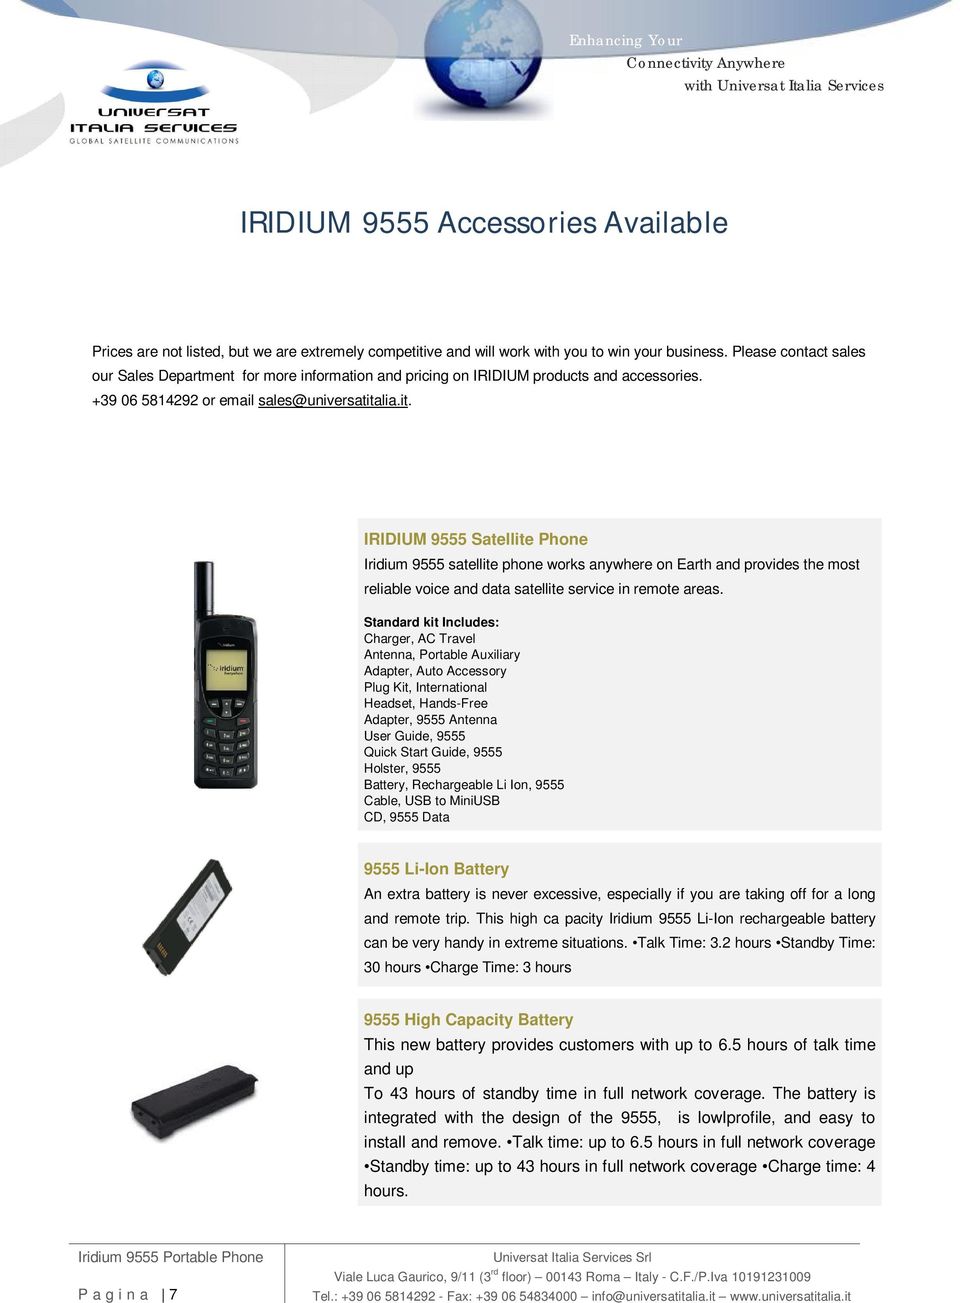 lia.it. IRIDIUM 9555 Satellite Phone Iridium 9555 satellite phone works anywhere on Earth and provides the most reliable voice and data satellite service in remote areas.